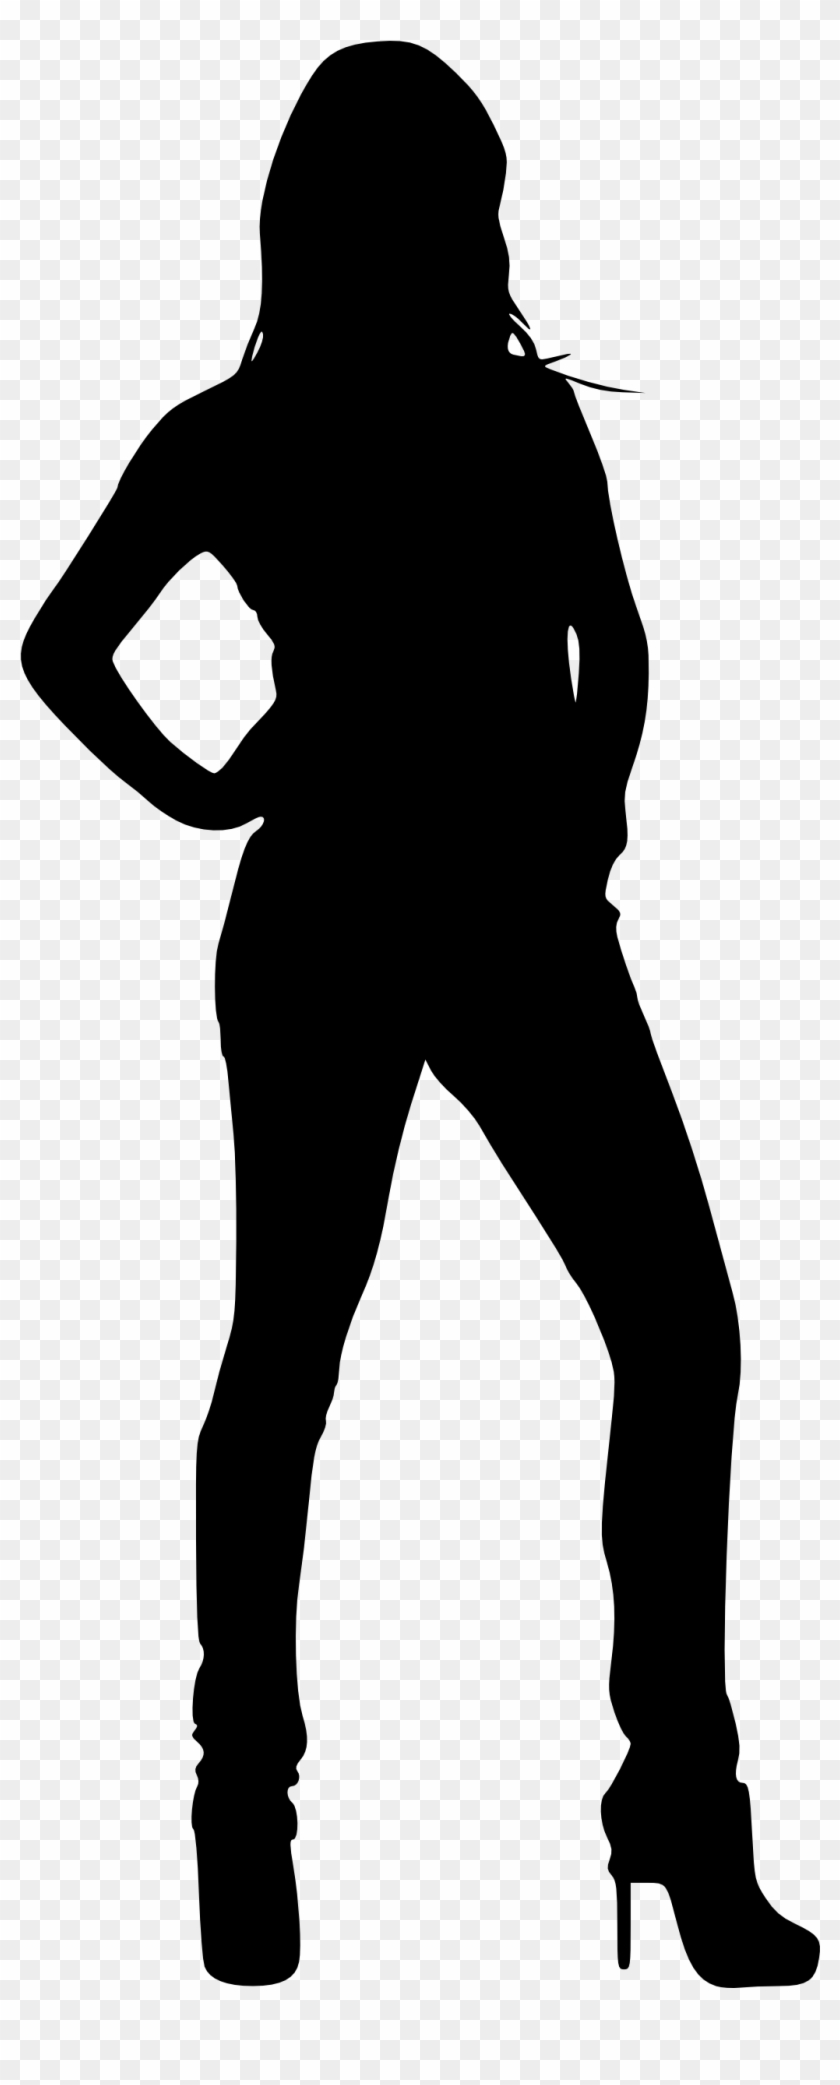 Free Download - Person Standing Silhouette Woman Clipart #483119